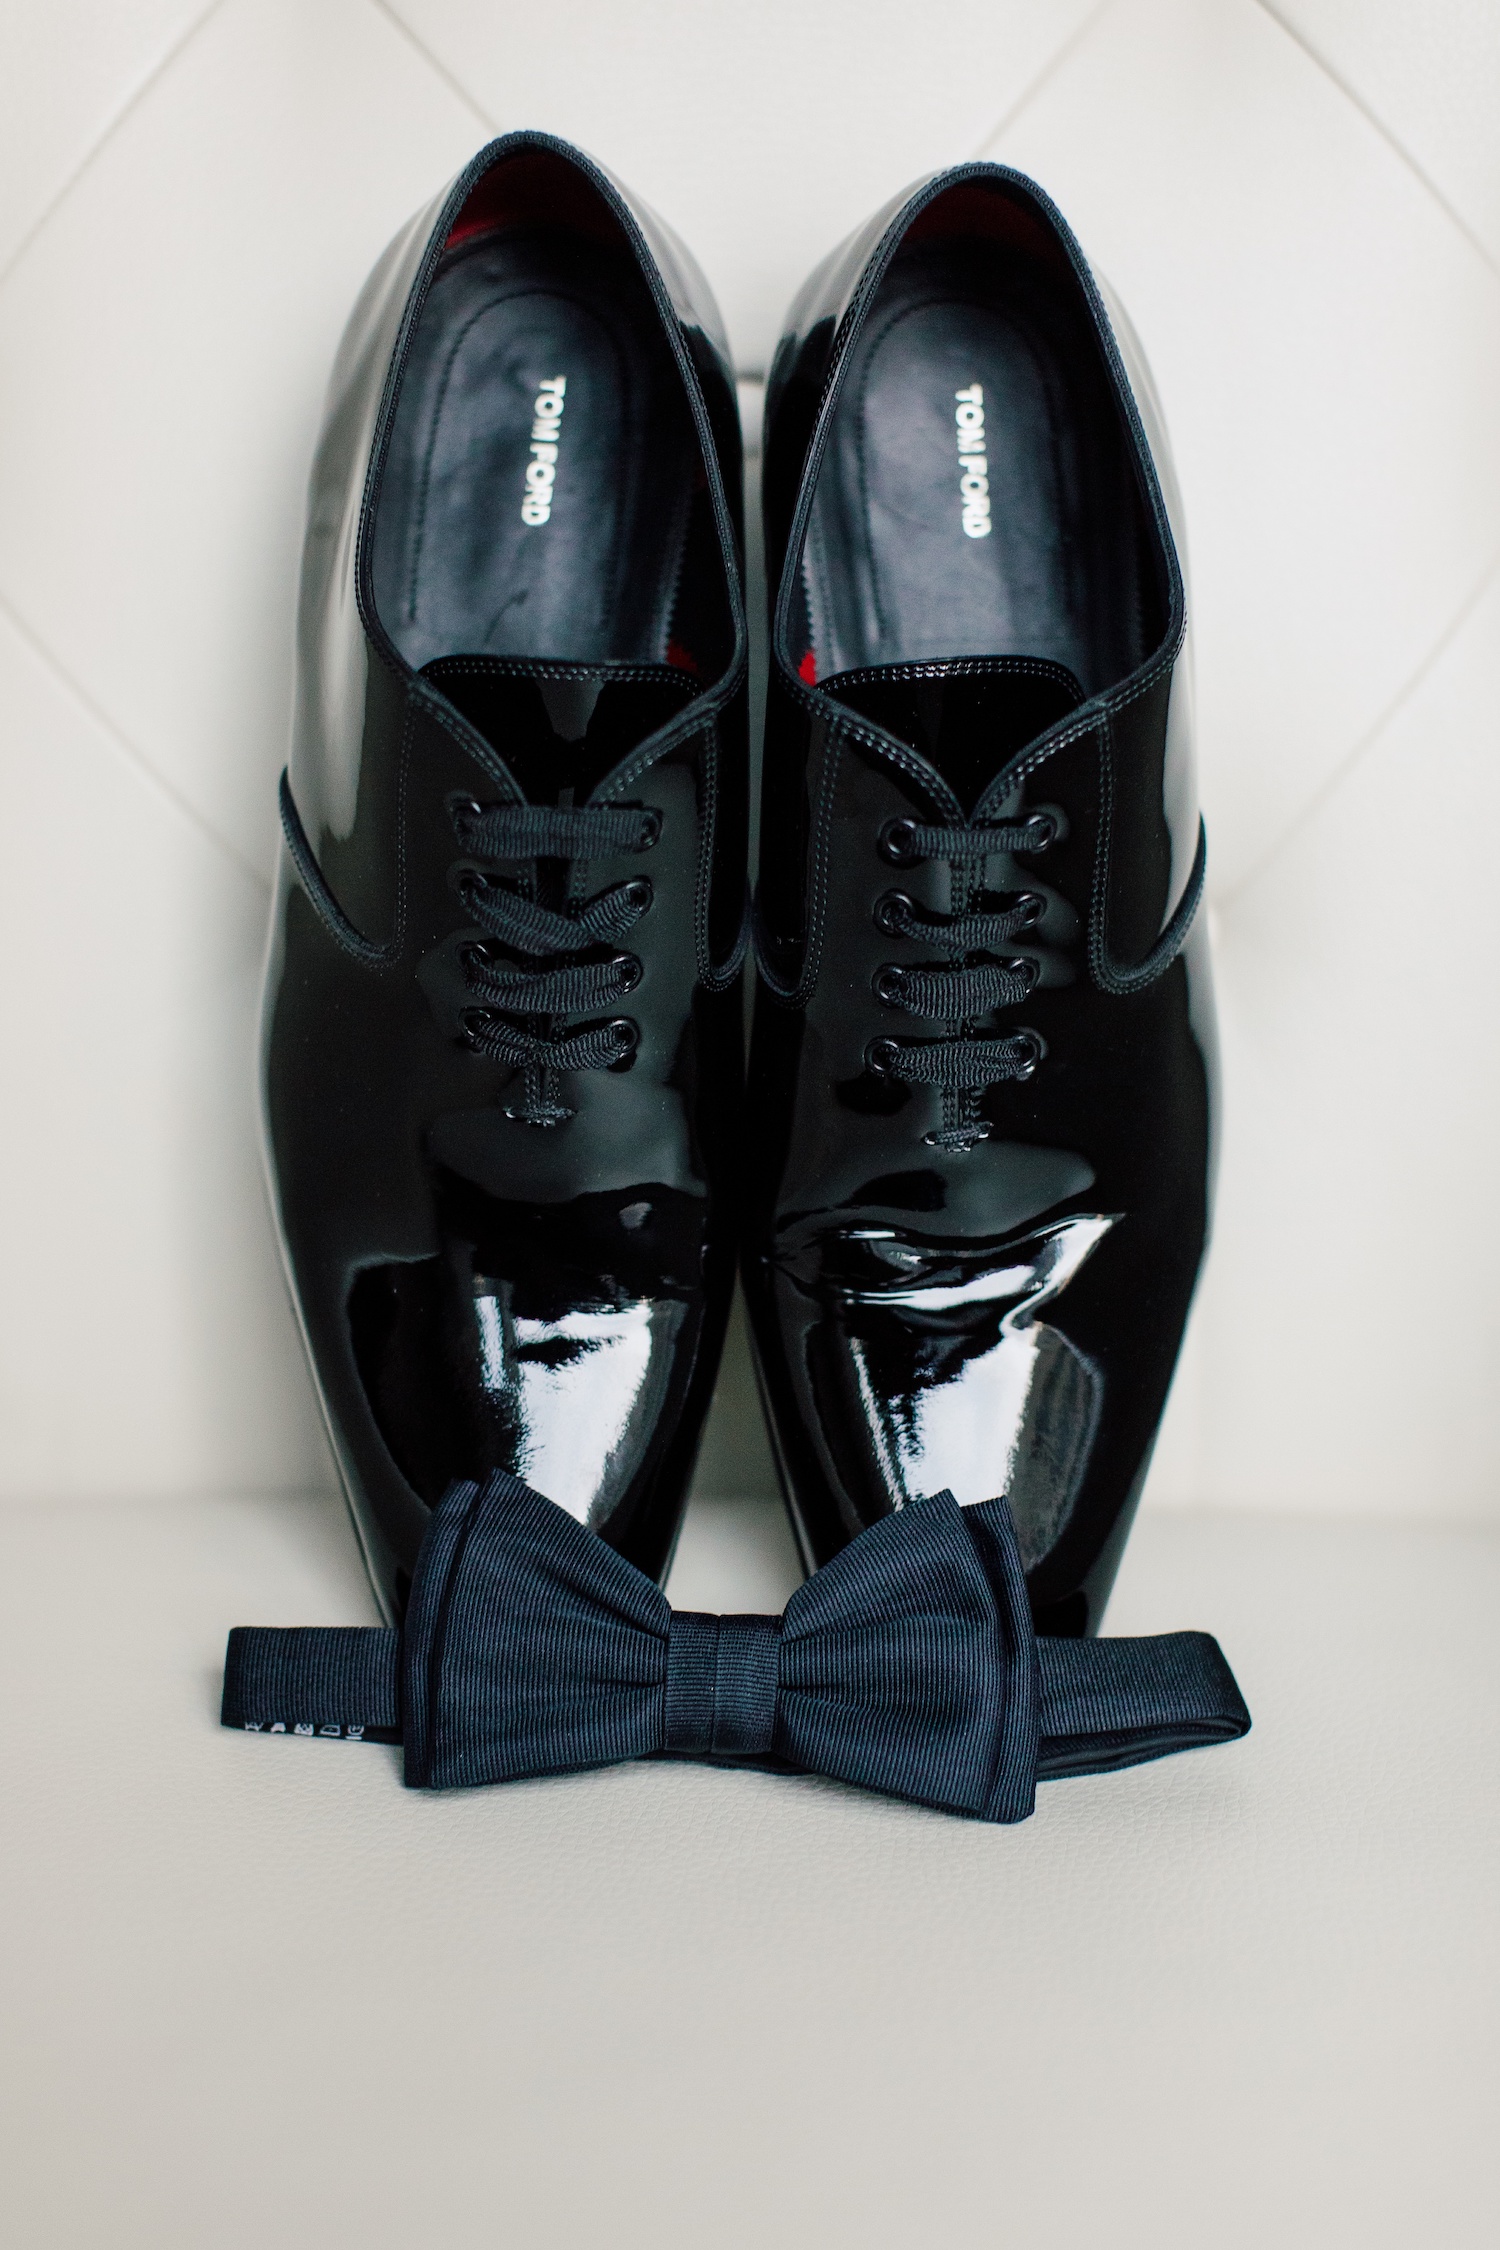 grooms details shoes